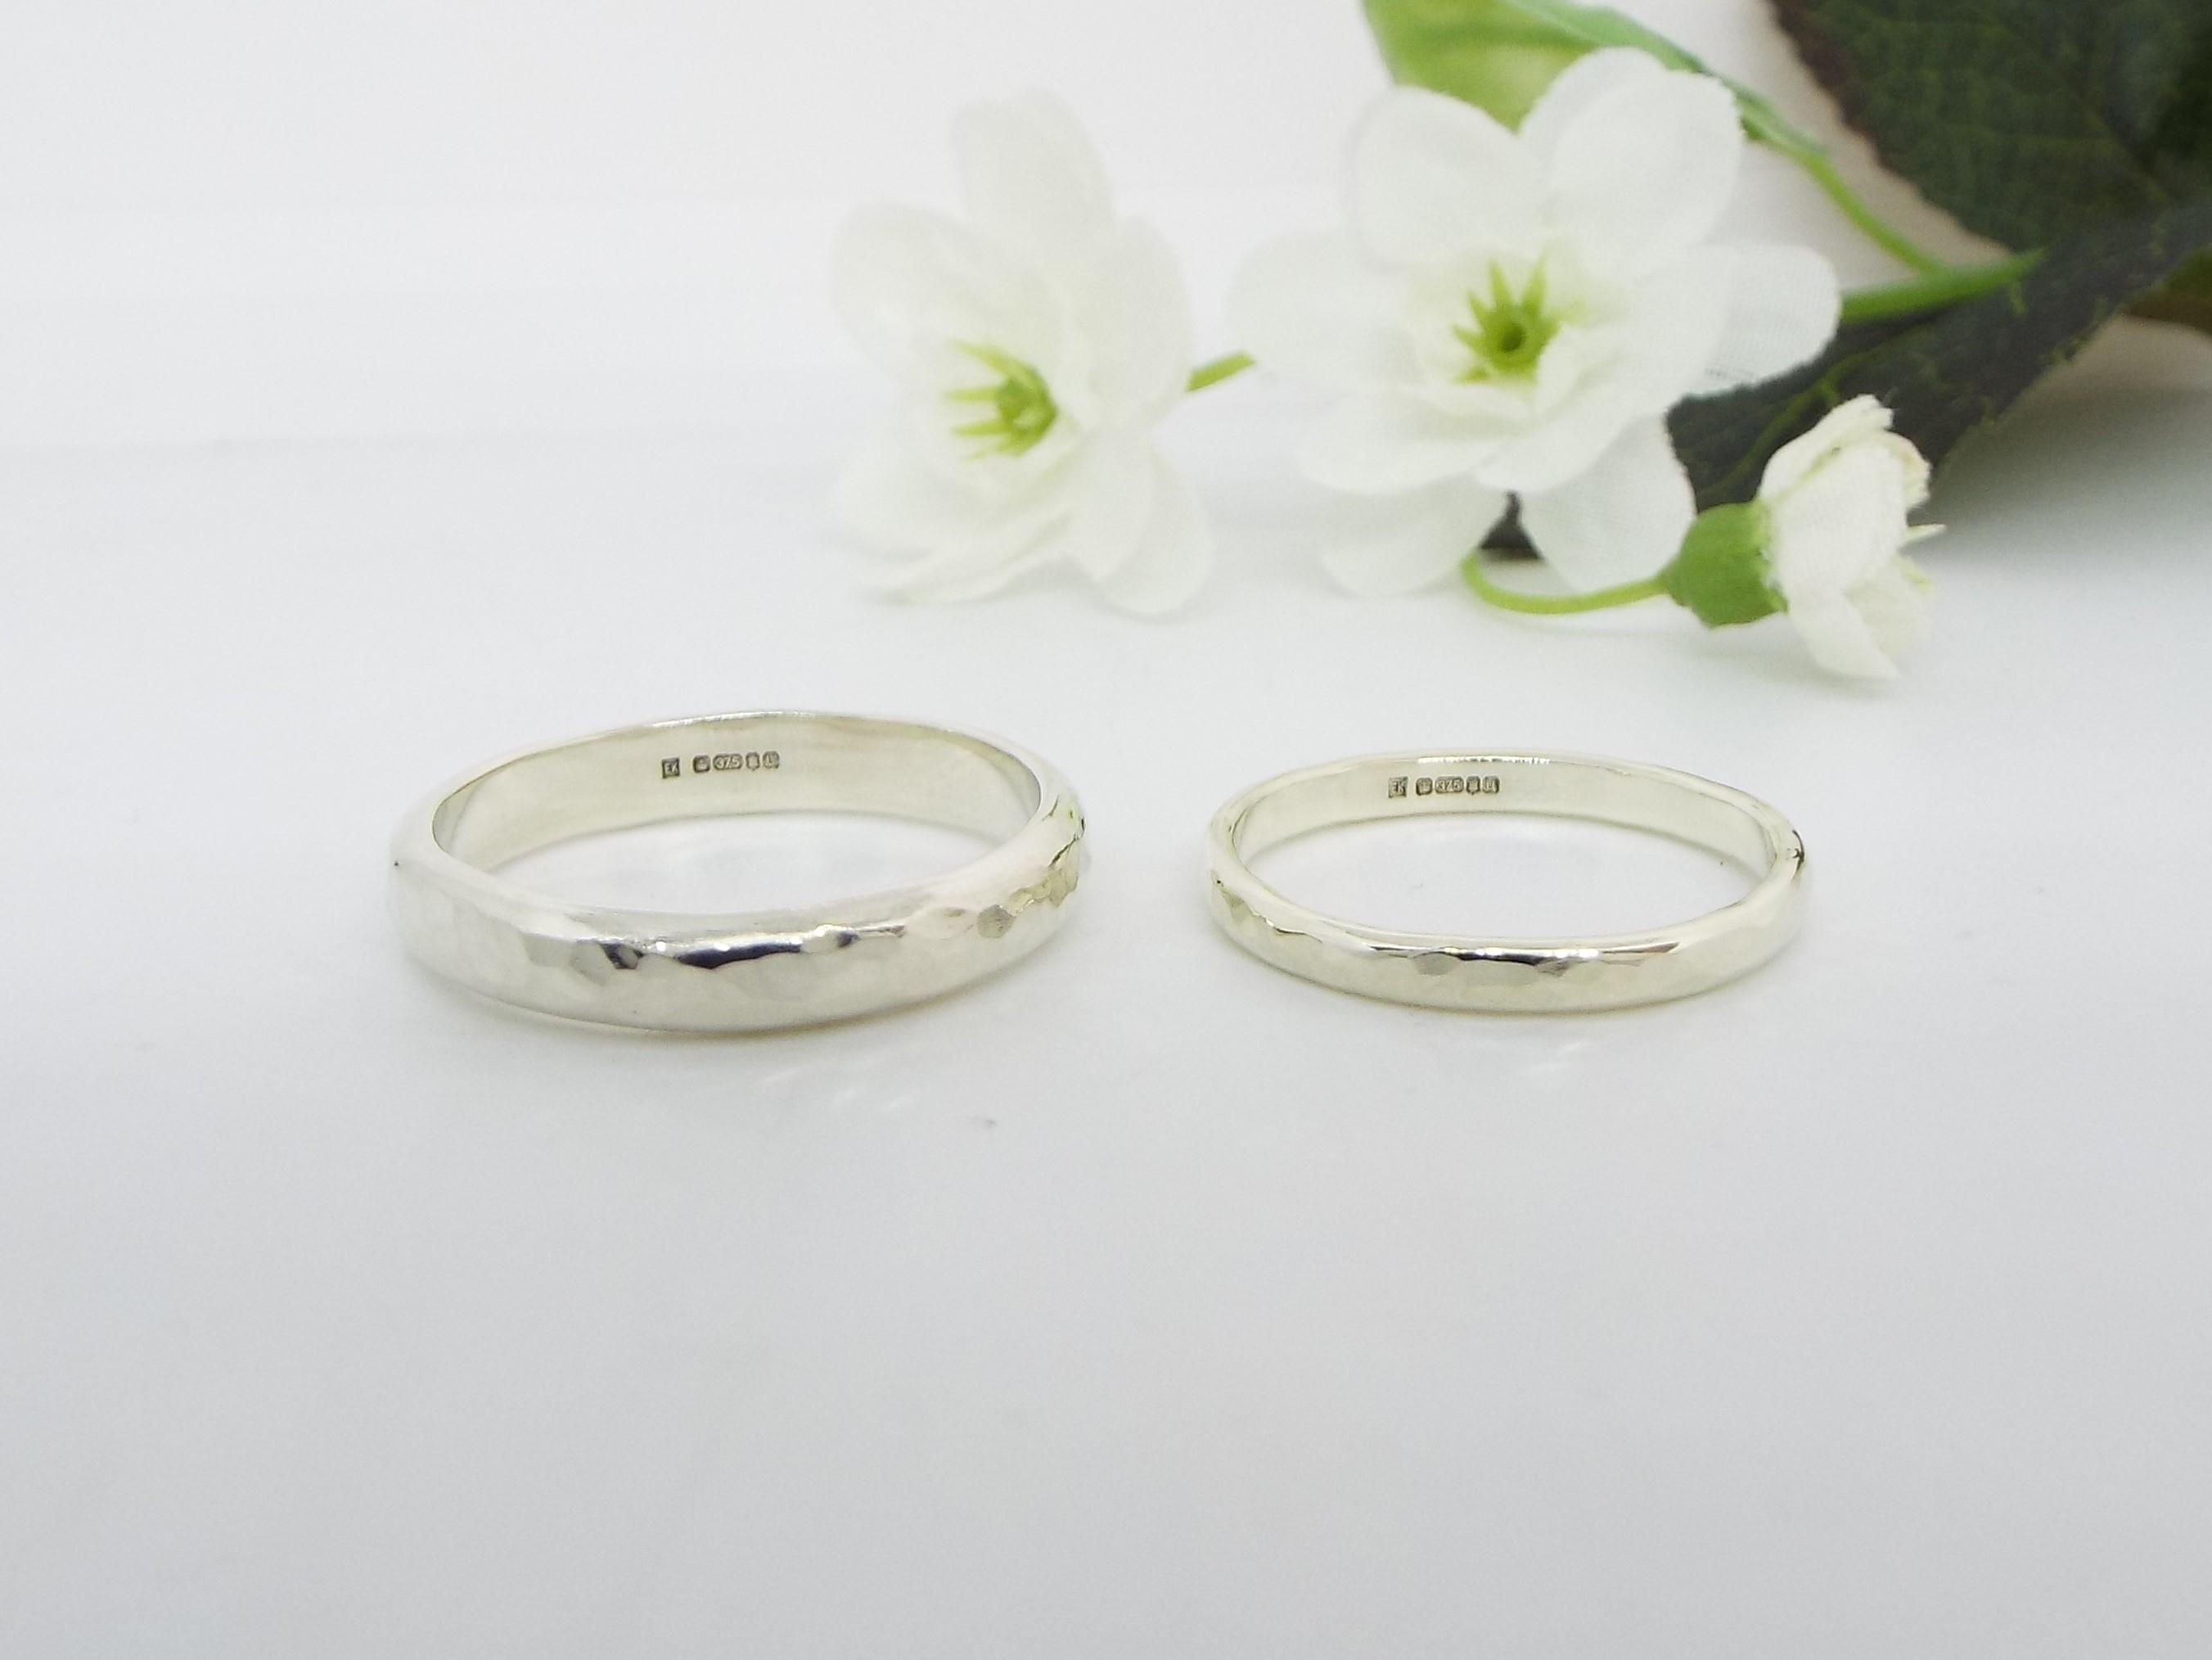 white gold wedding band set with a hammered finish